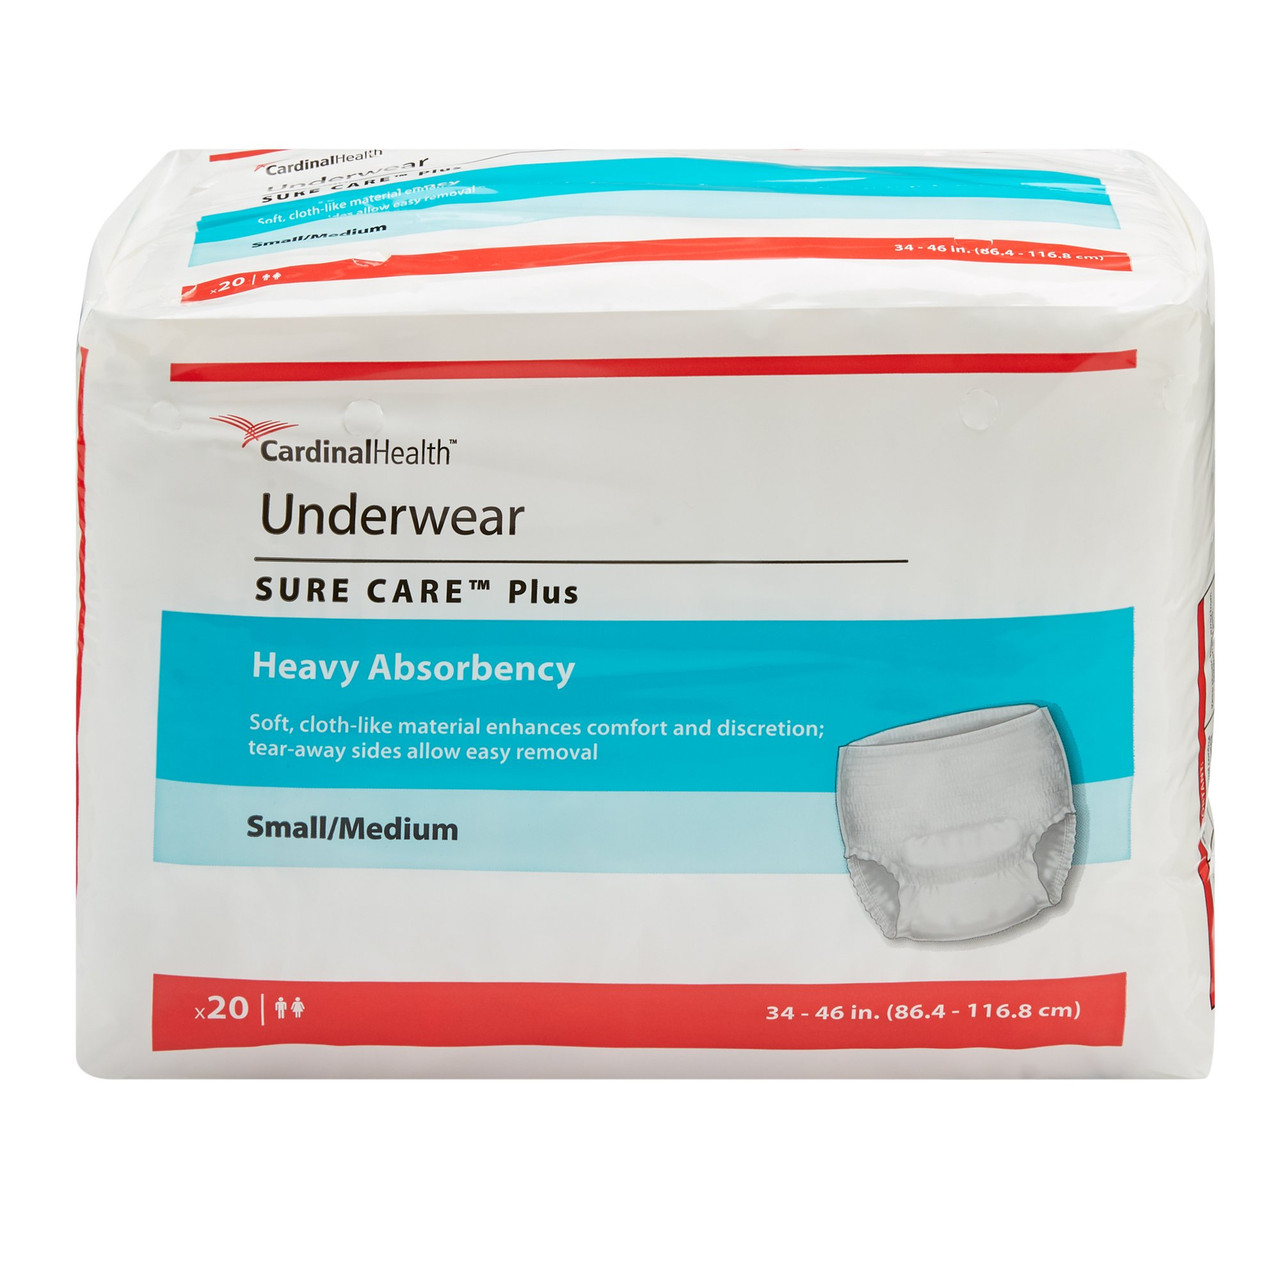 Sure Care Plus Incontinence Underwear, Heavy Absorbency - Unisex Adult  Undergarment